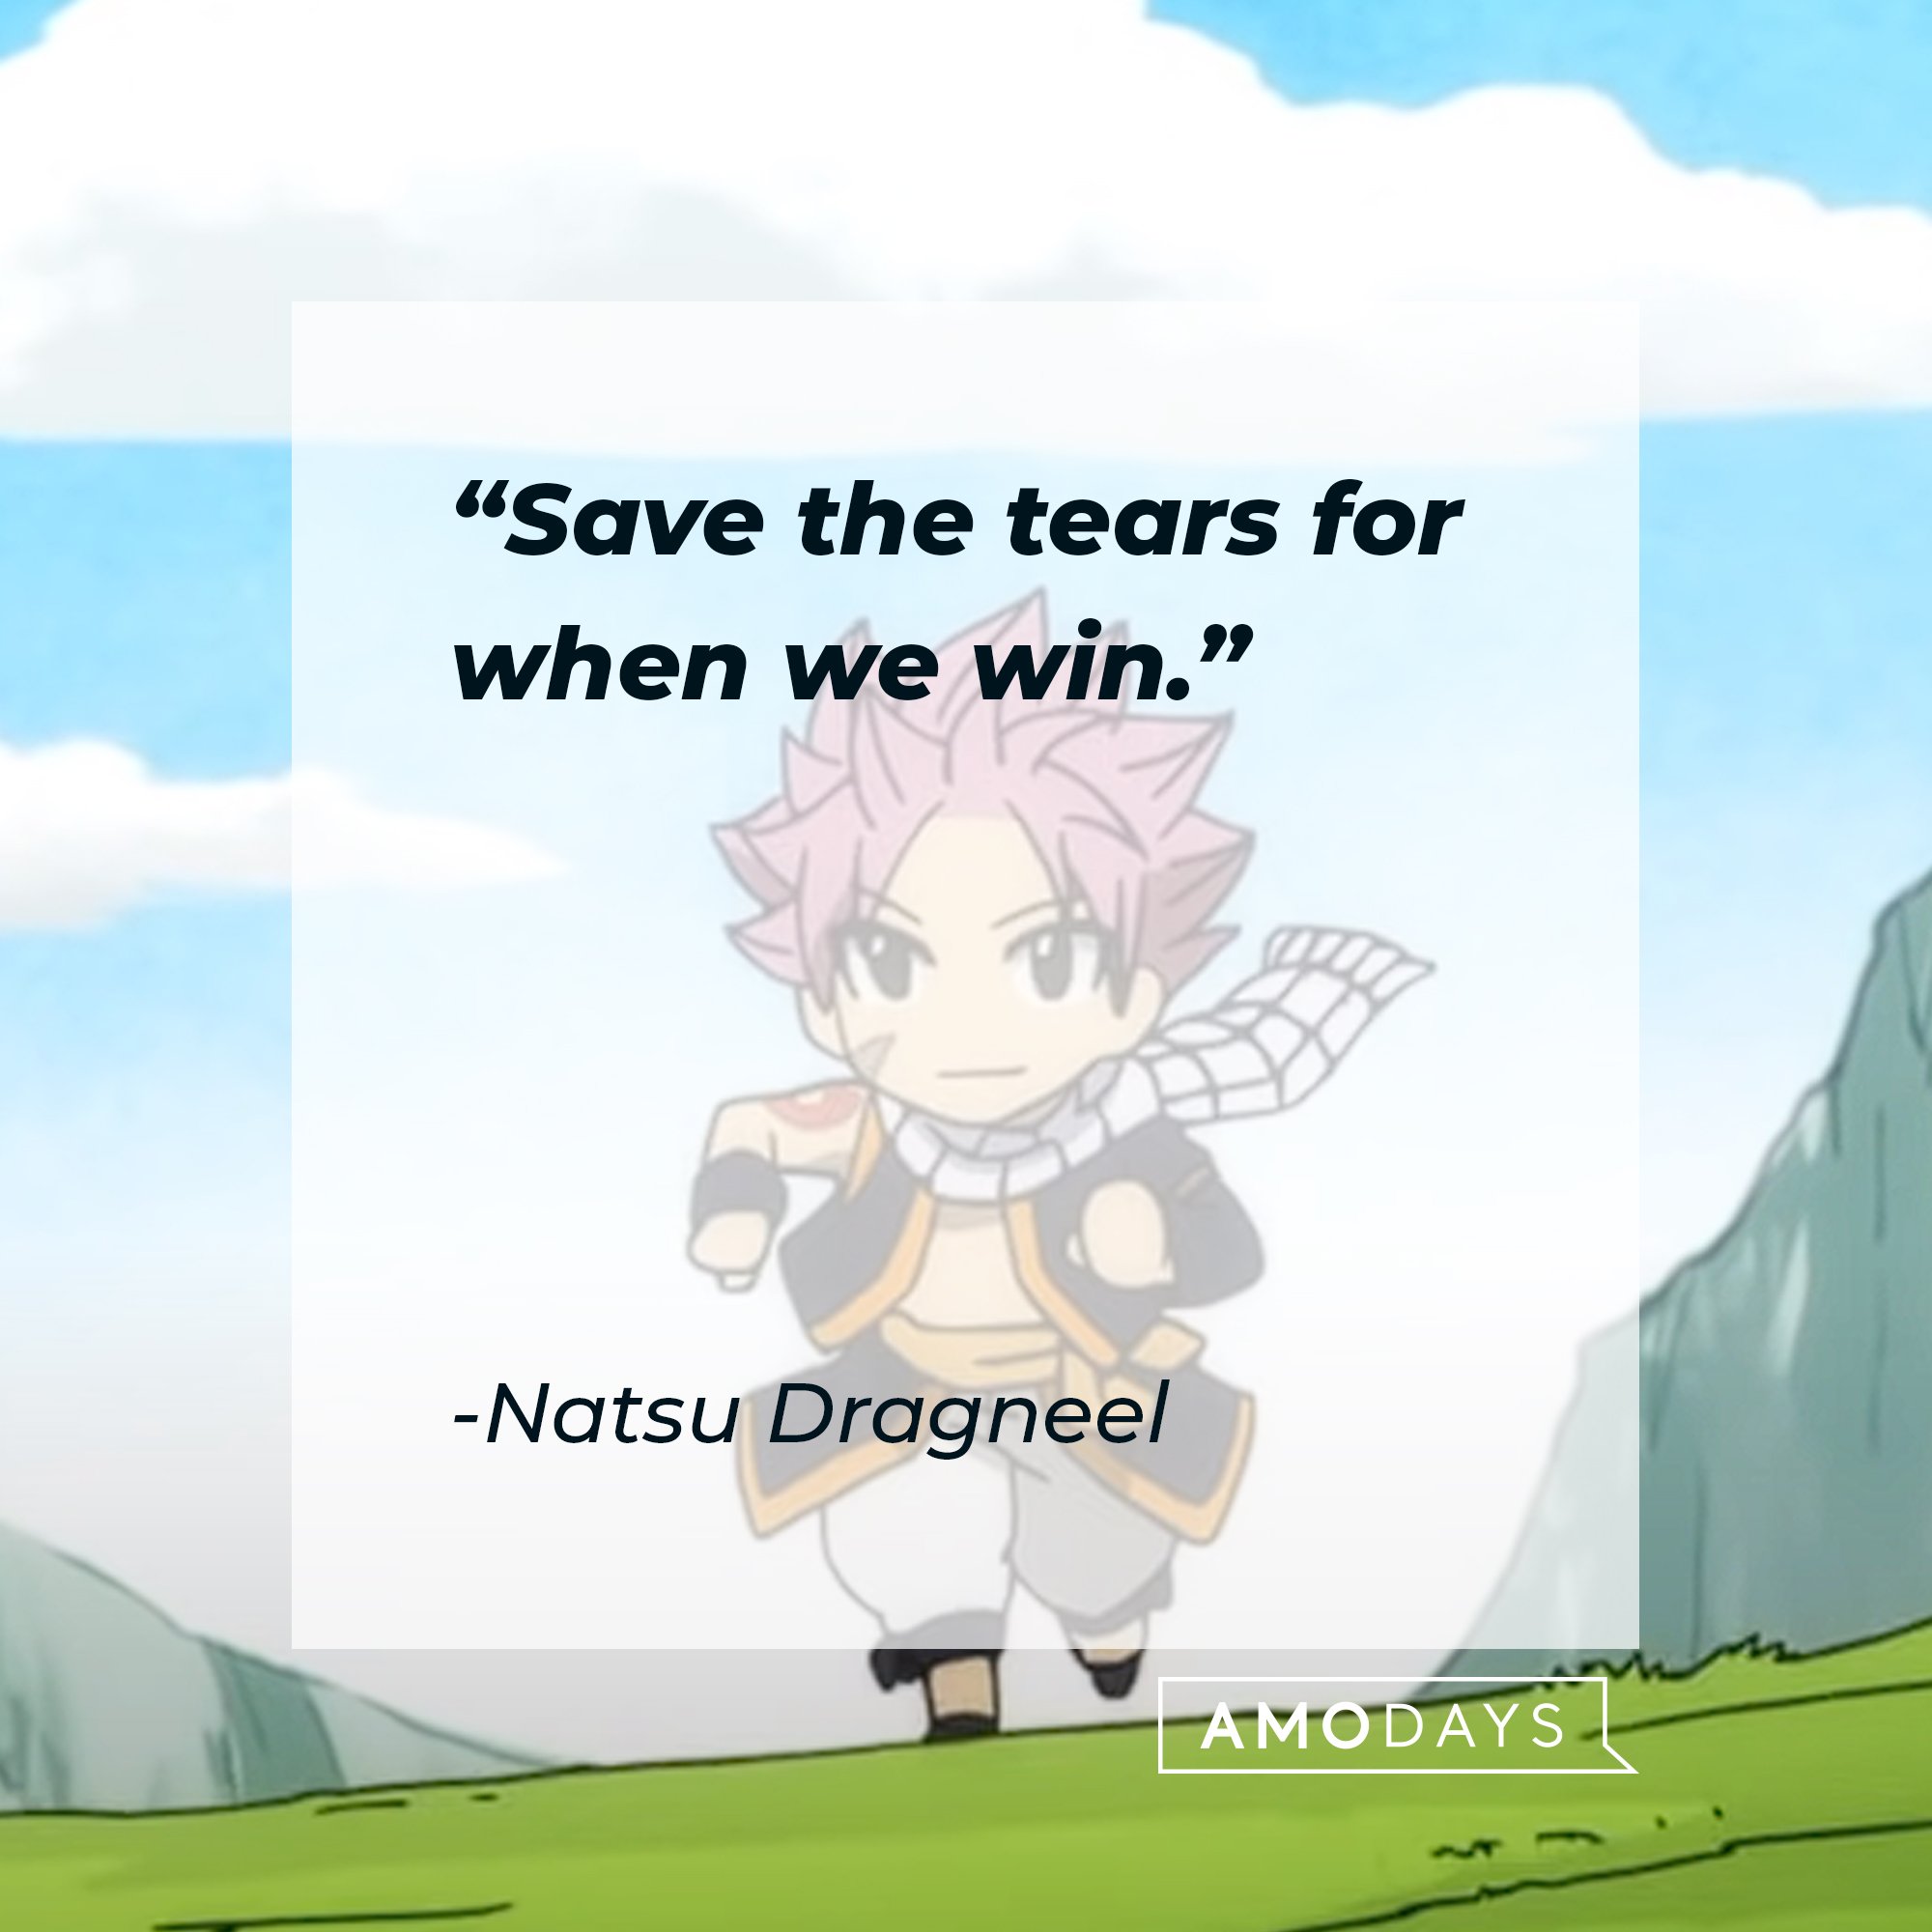 Natsu Dragneel’s quote: "Save the tears for when we win." | Image: AmoDays